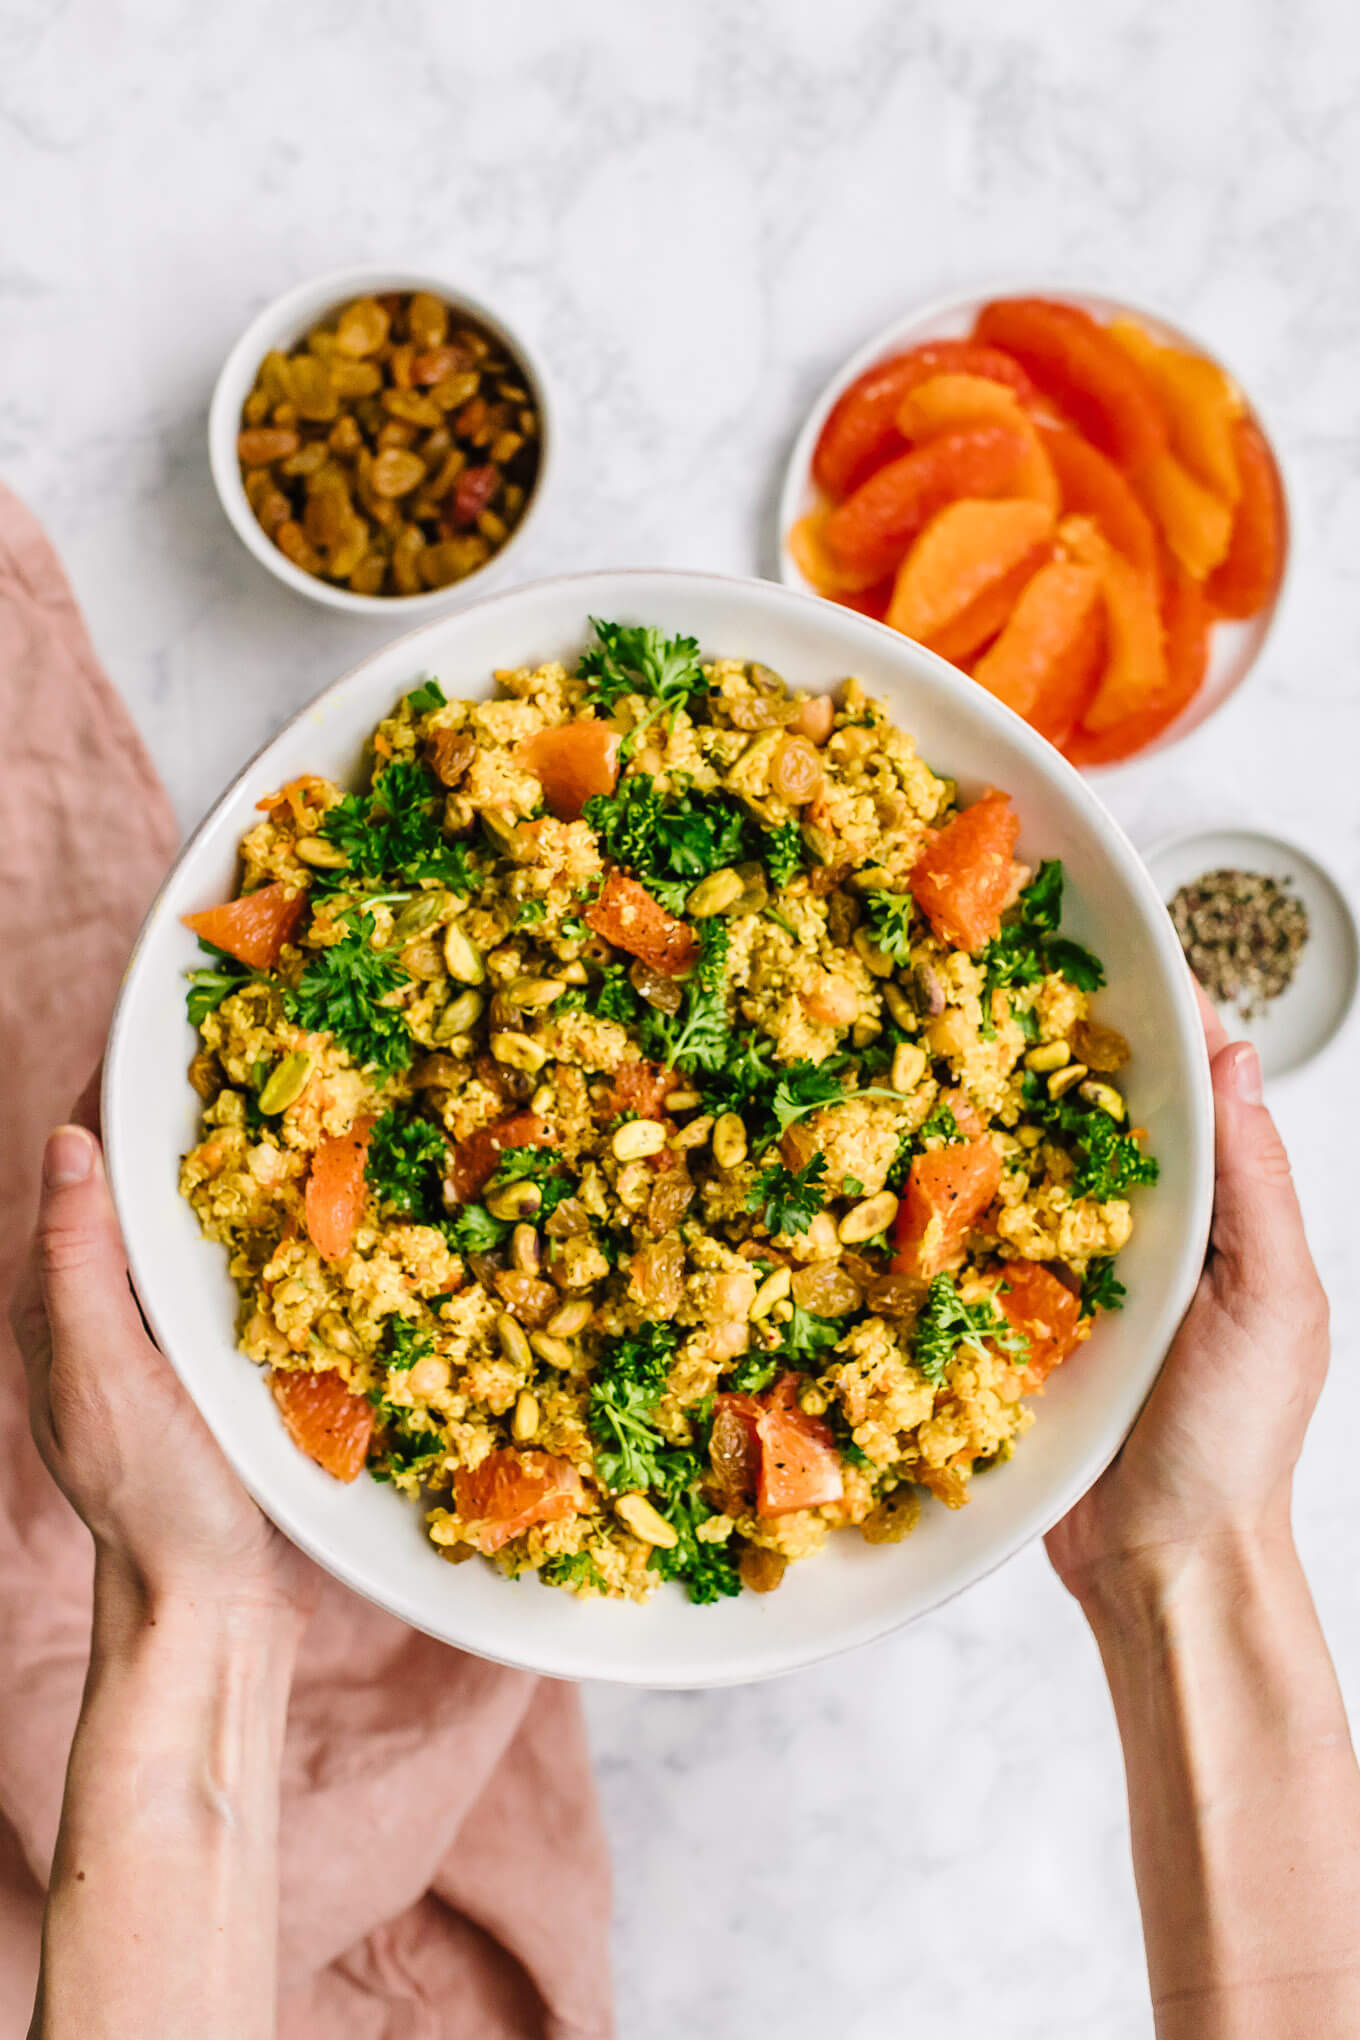 Hands holding bowl of moroccan chickpea quinoa salad